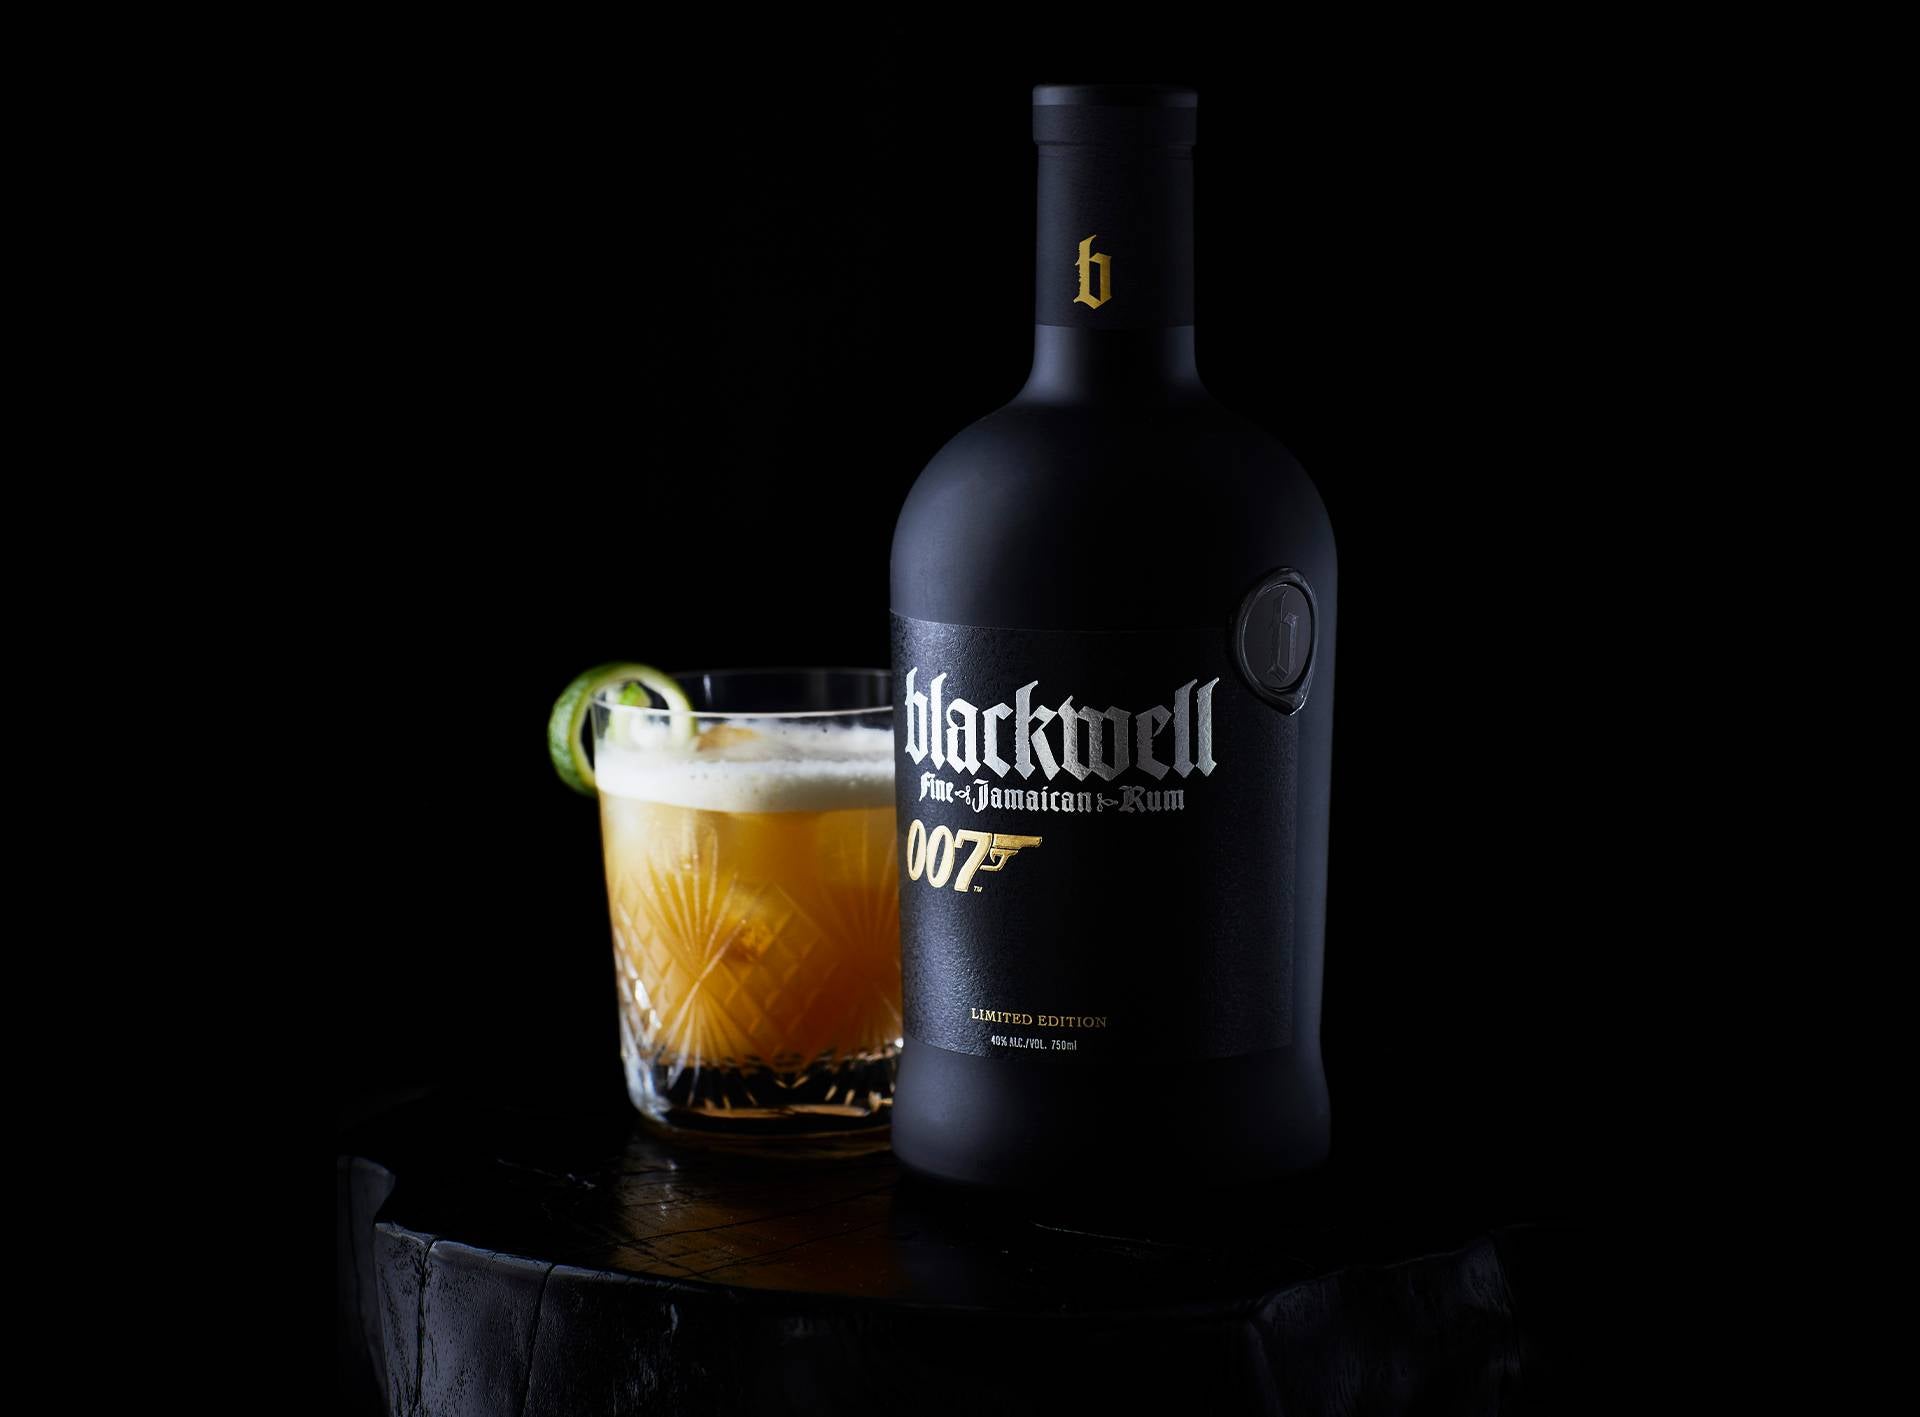 007 Limited Edition Blackwell Rum